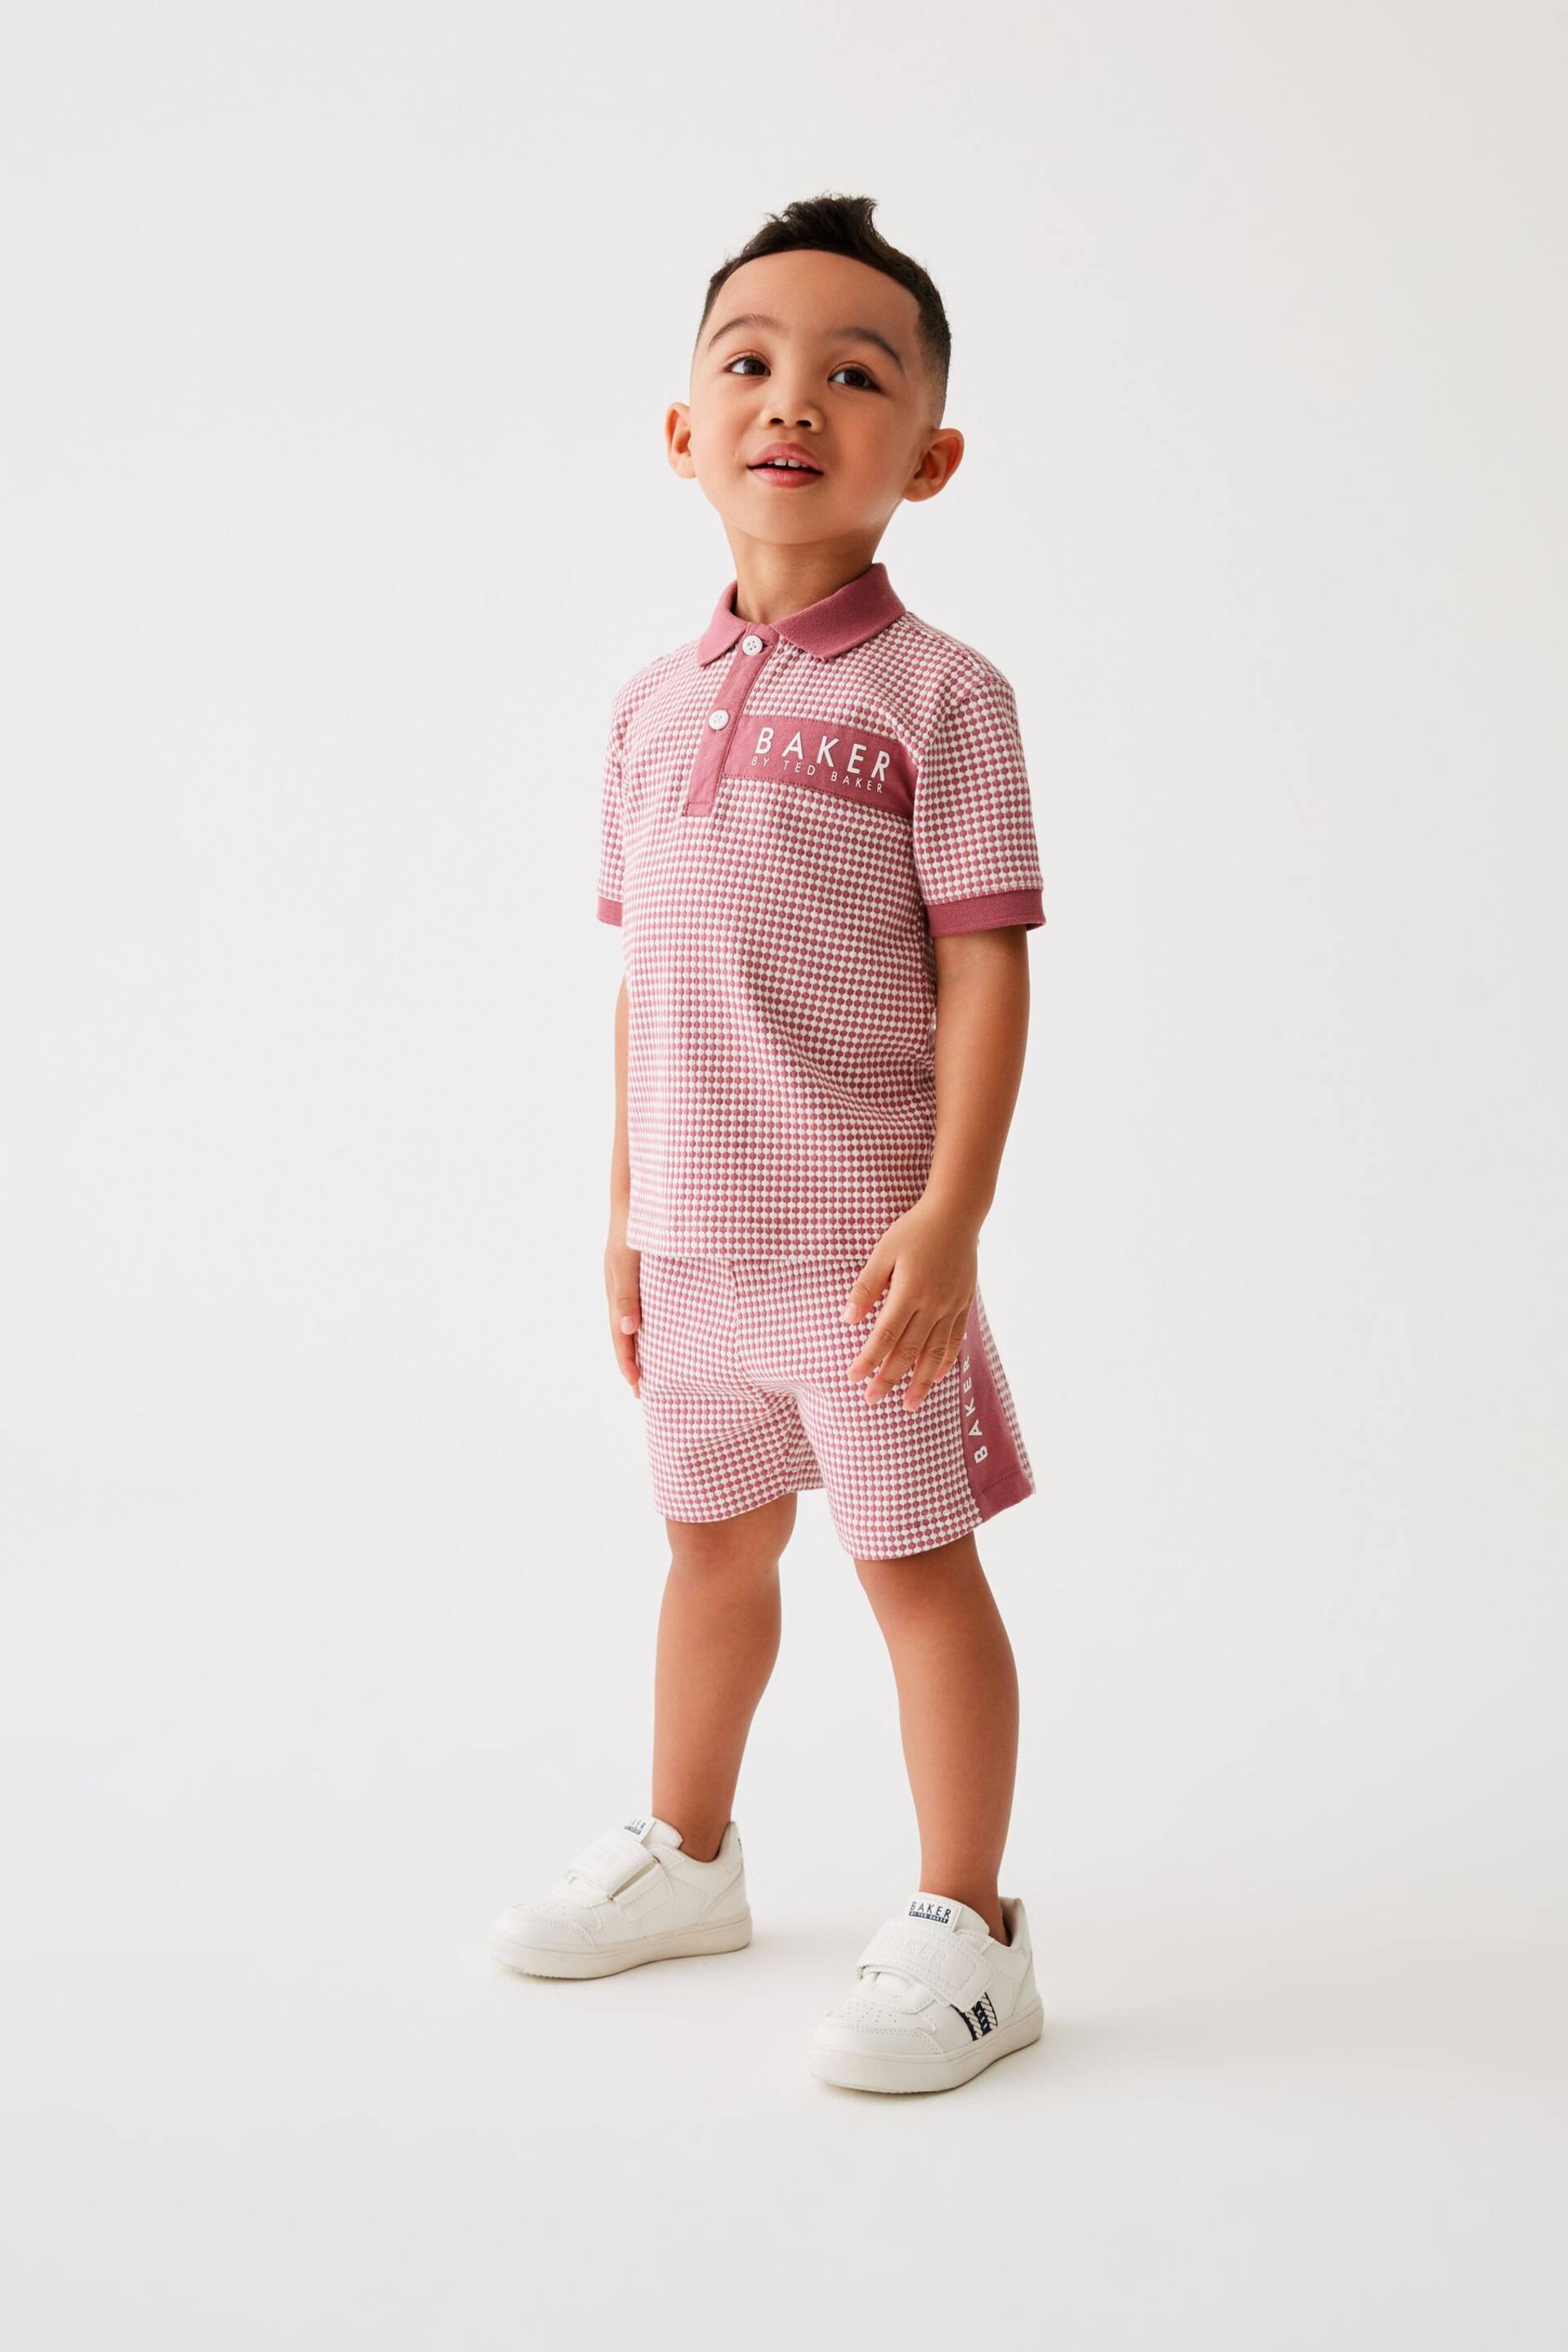 Baker by Ted Baker Textured Polo Shirt and Short Set - Image 2 of 16